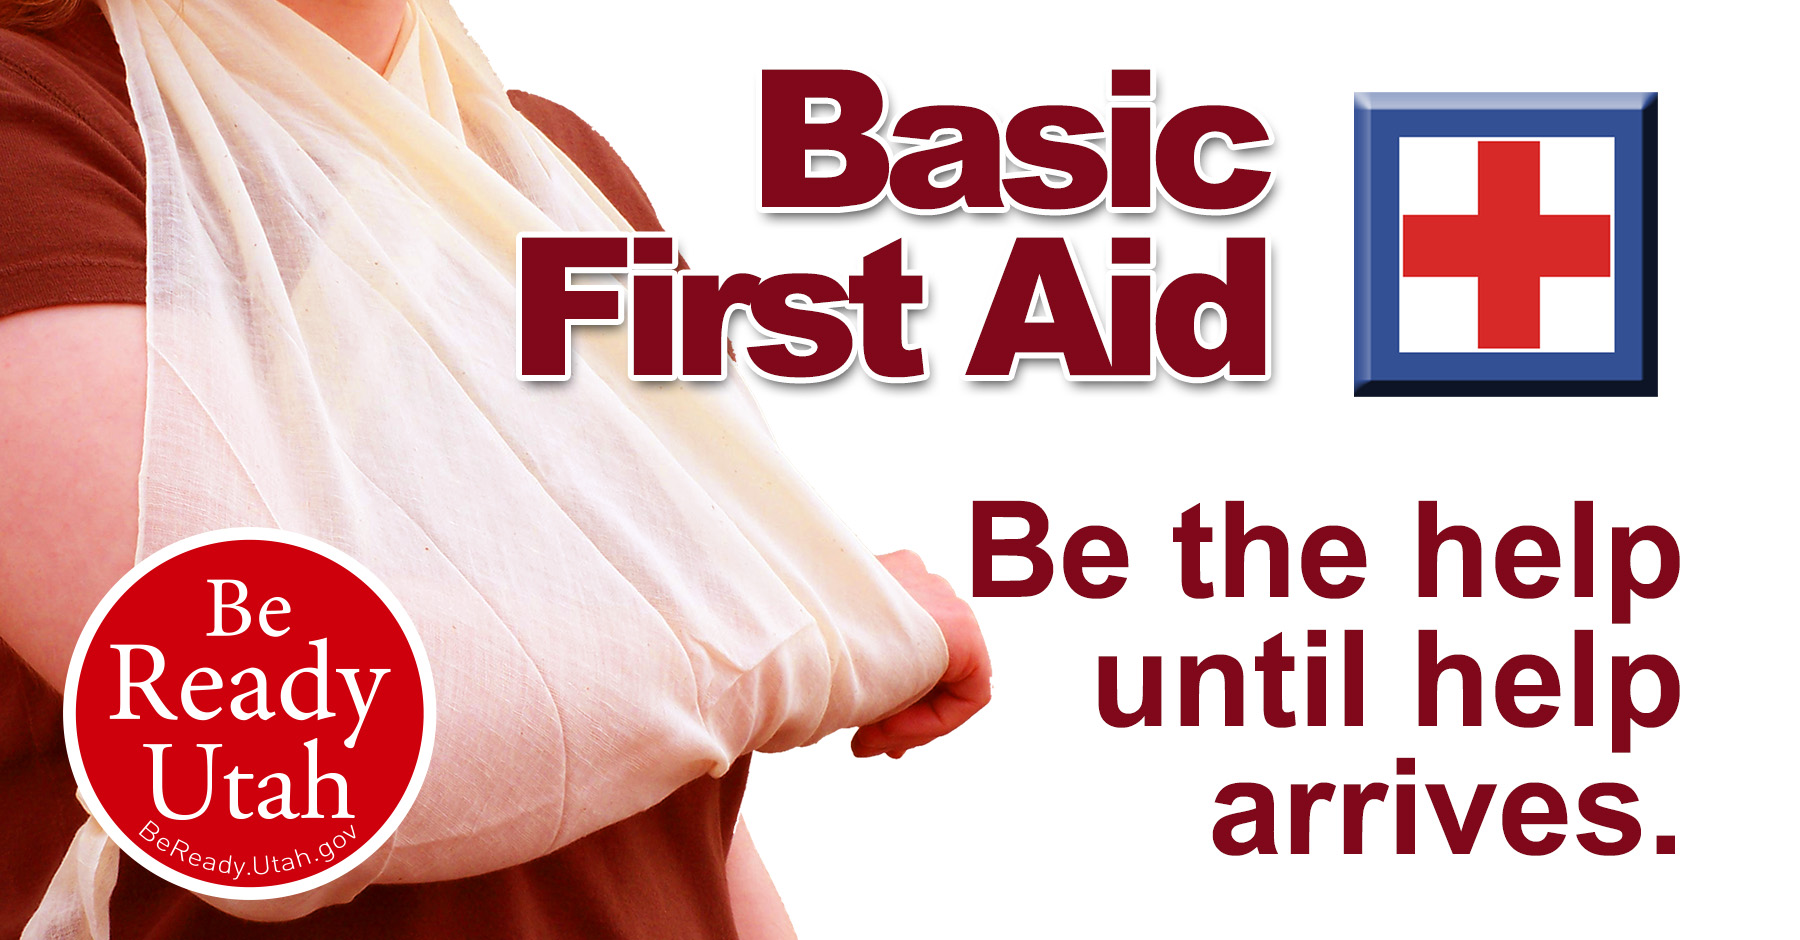 Basic First Aid link. Be the help until help arrives.